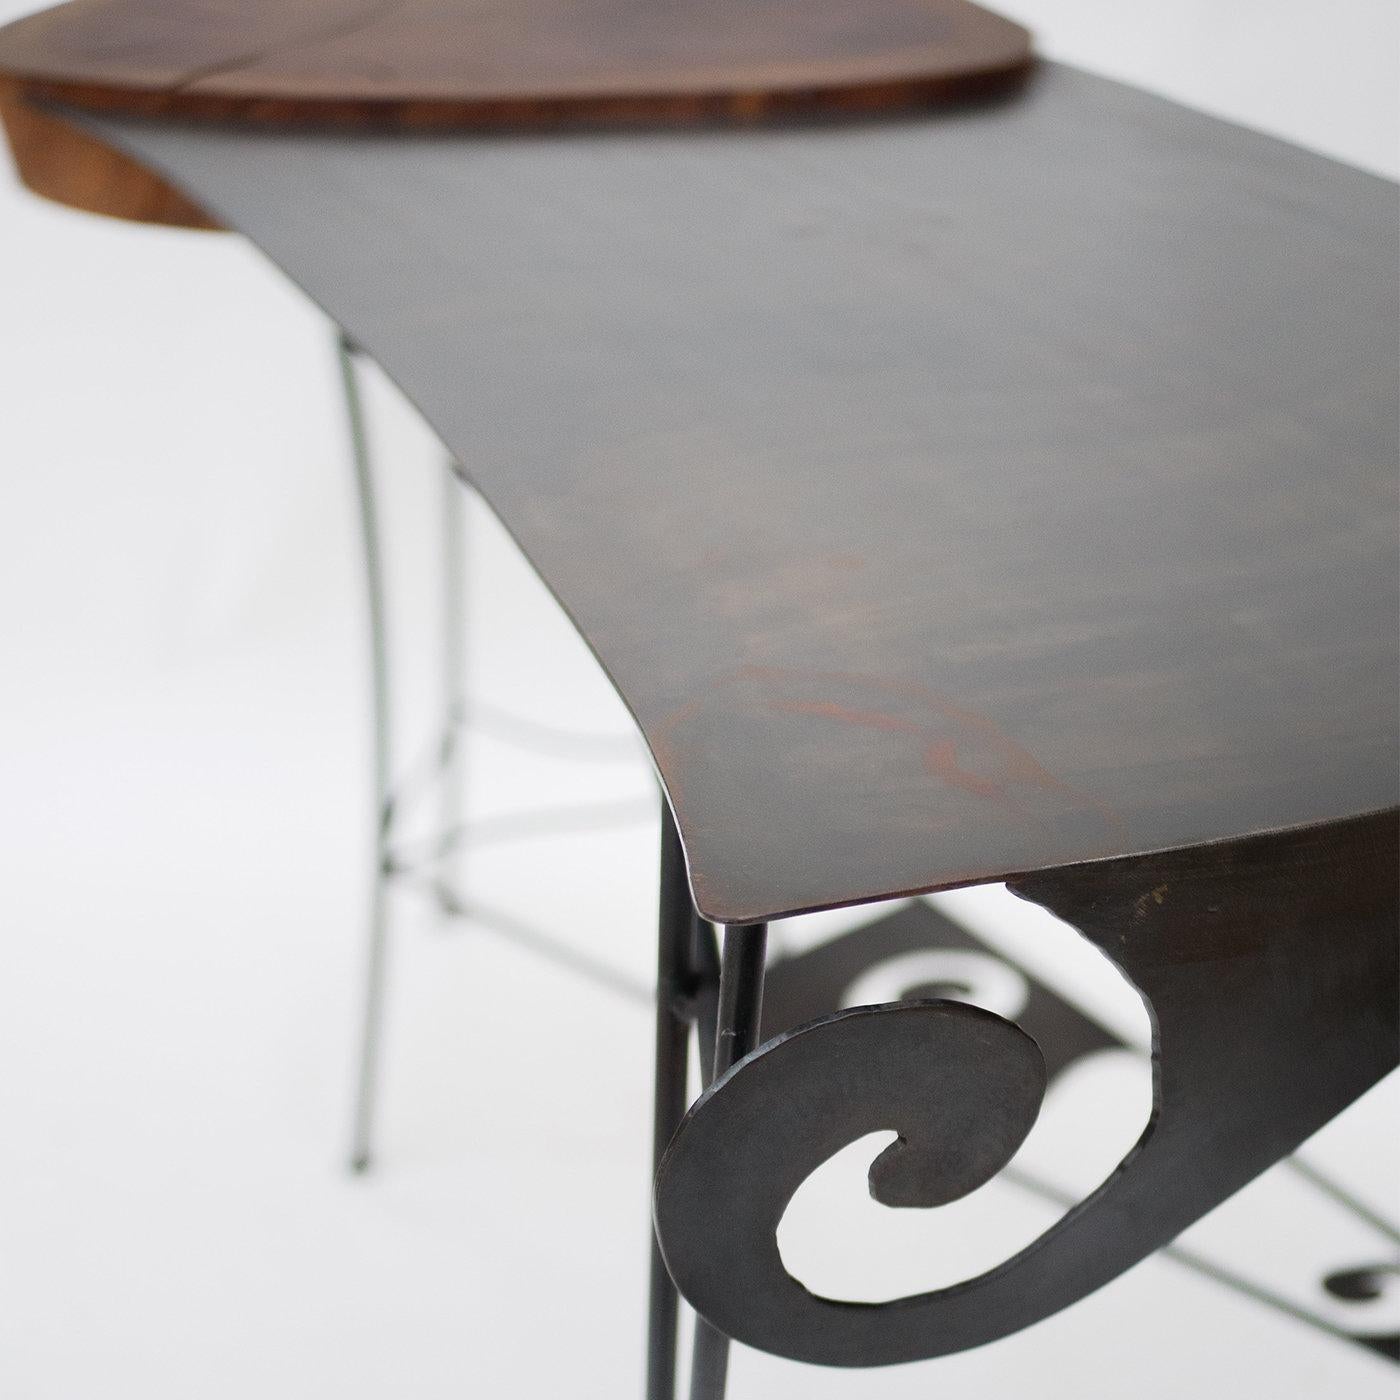 A splendid marriage between solid oak and wrought iron, this enchanting and sophisticated desk will make a refined statement in any private study or bedroom. The smooth curves and curled details enlivening the top and the stretcher connecting the